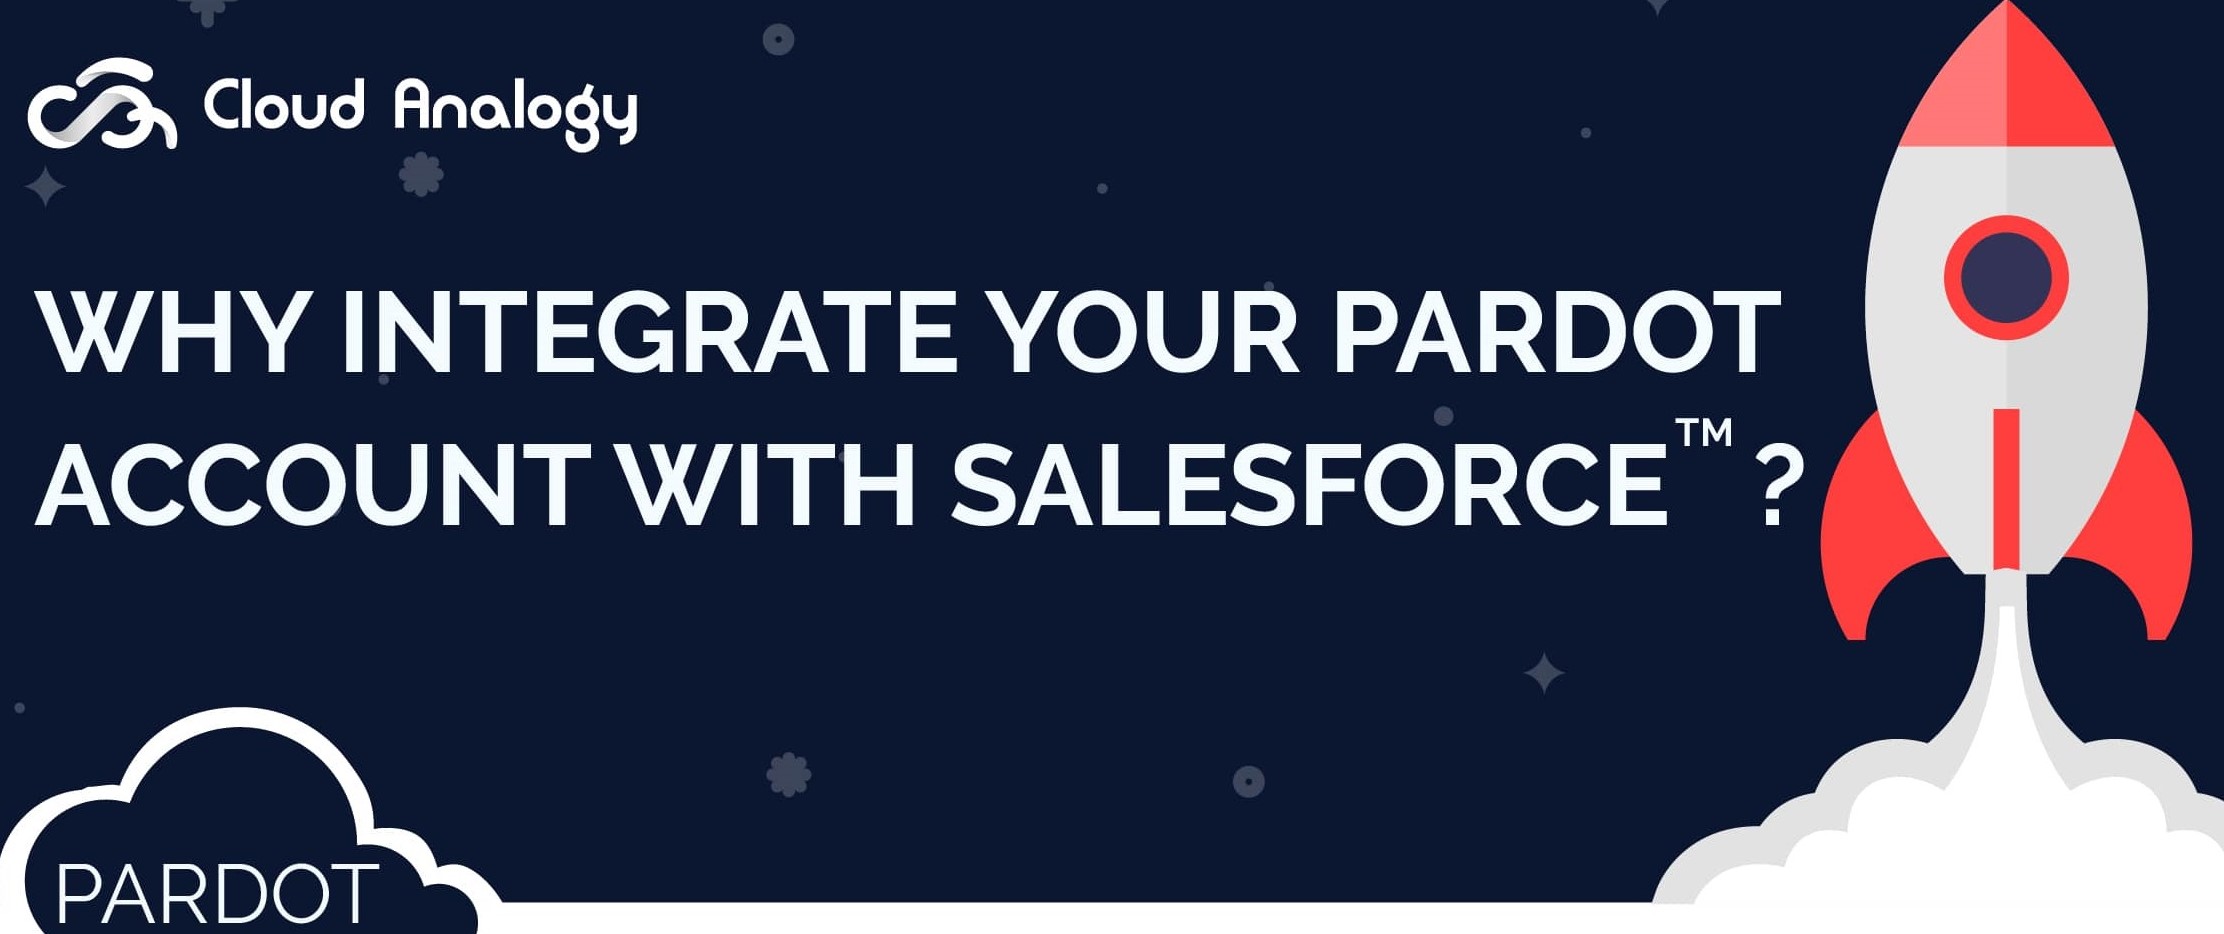 Why integrate your pardot account with Salesforce